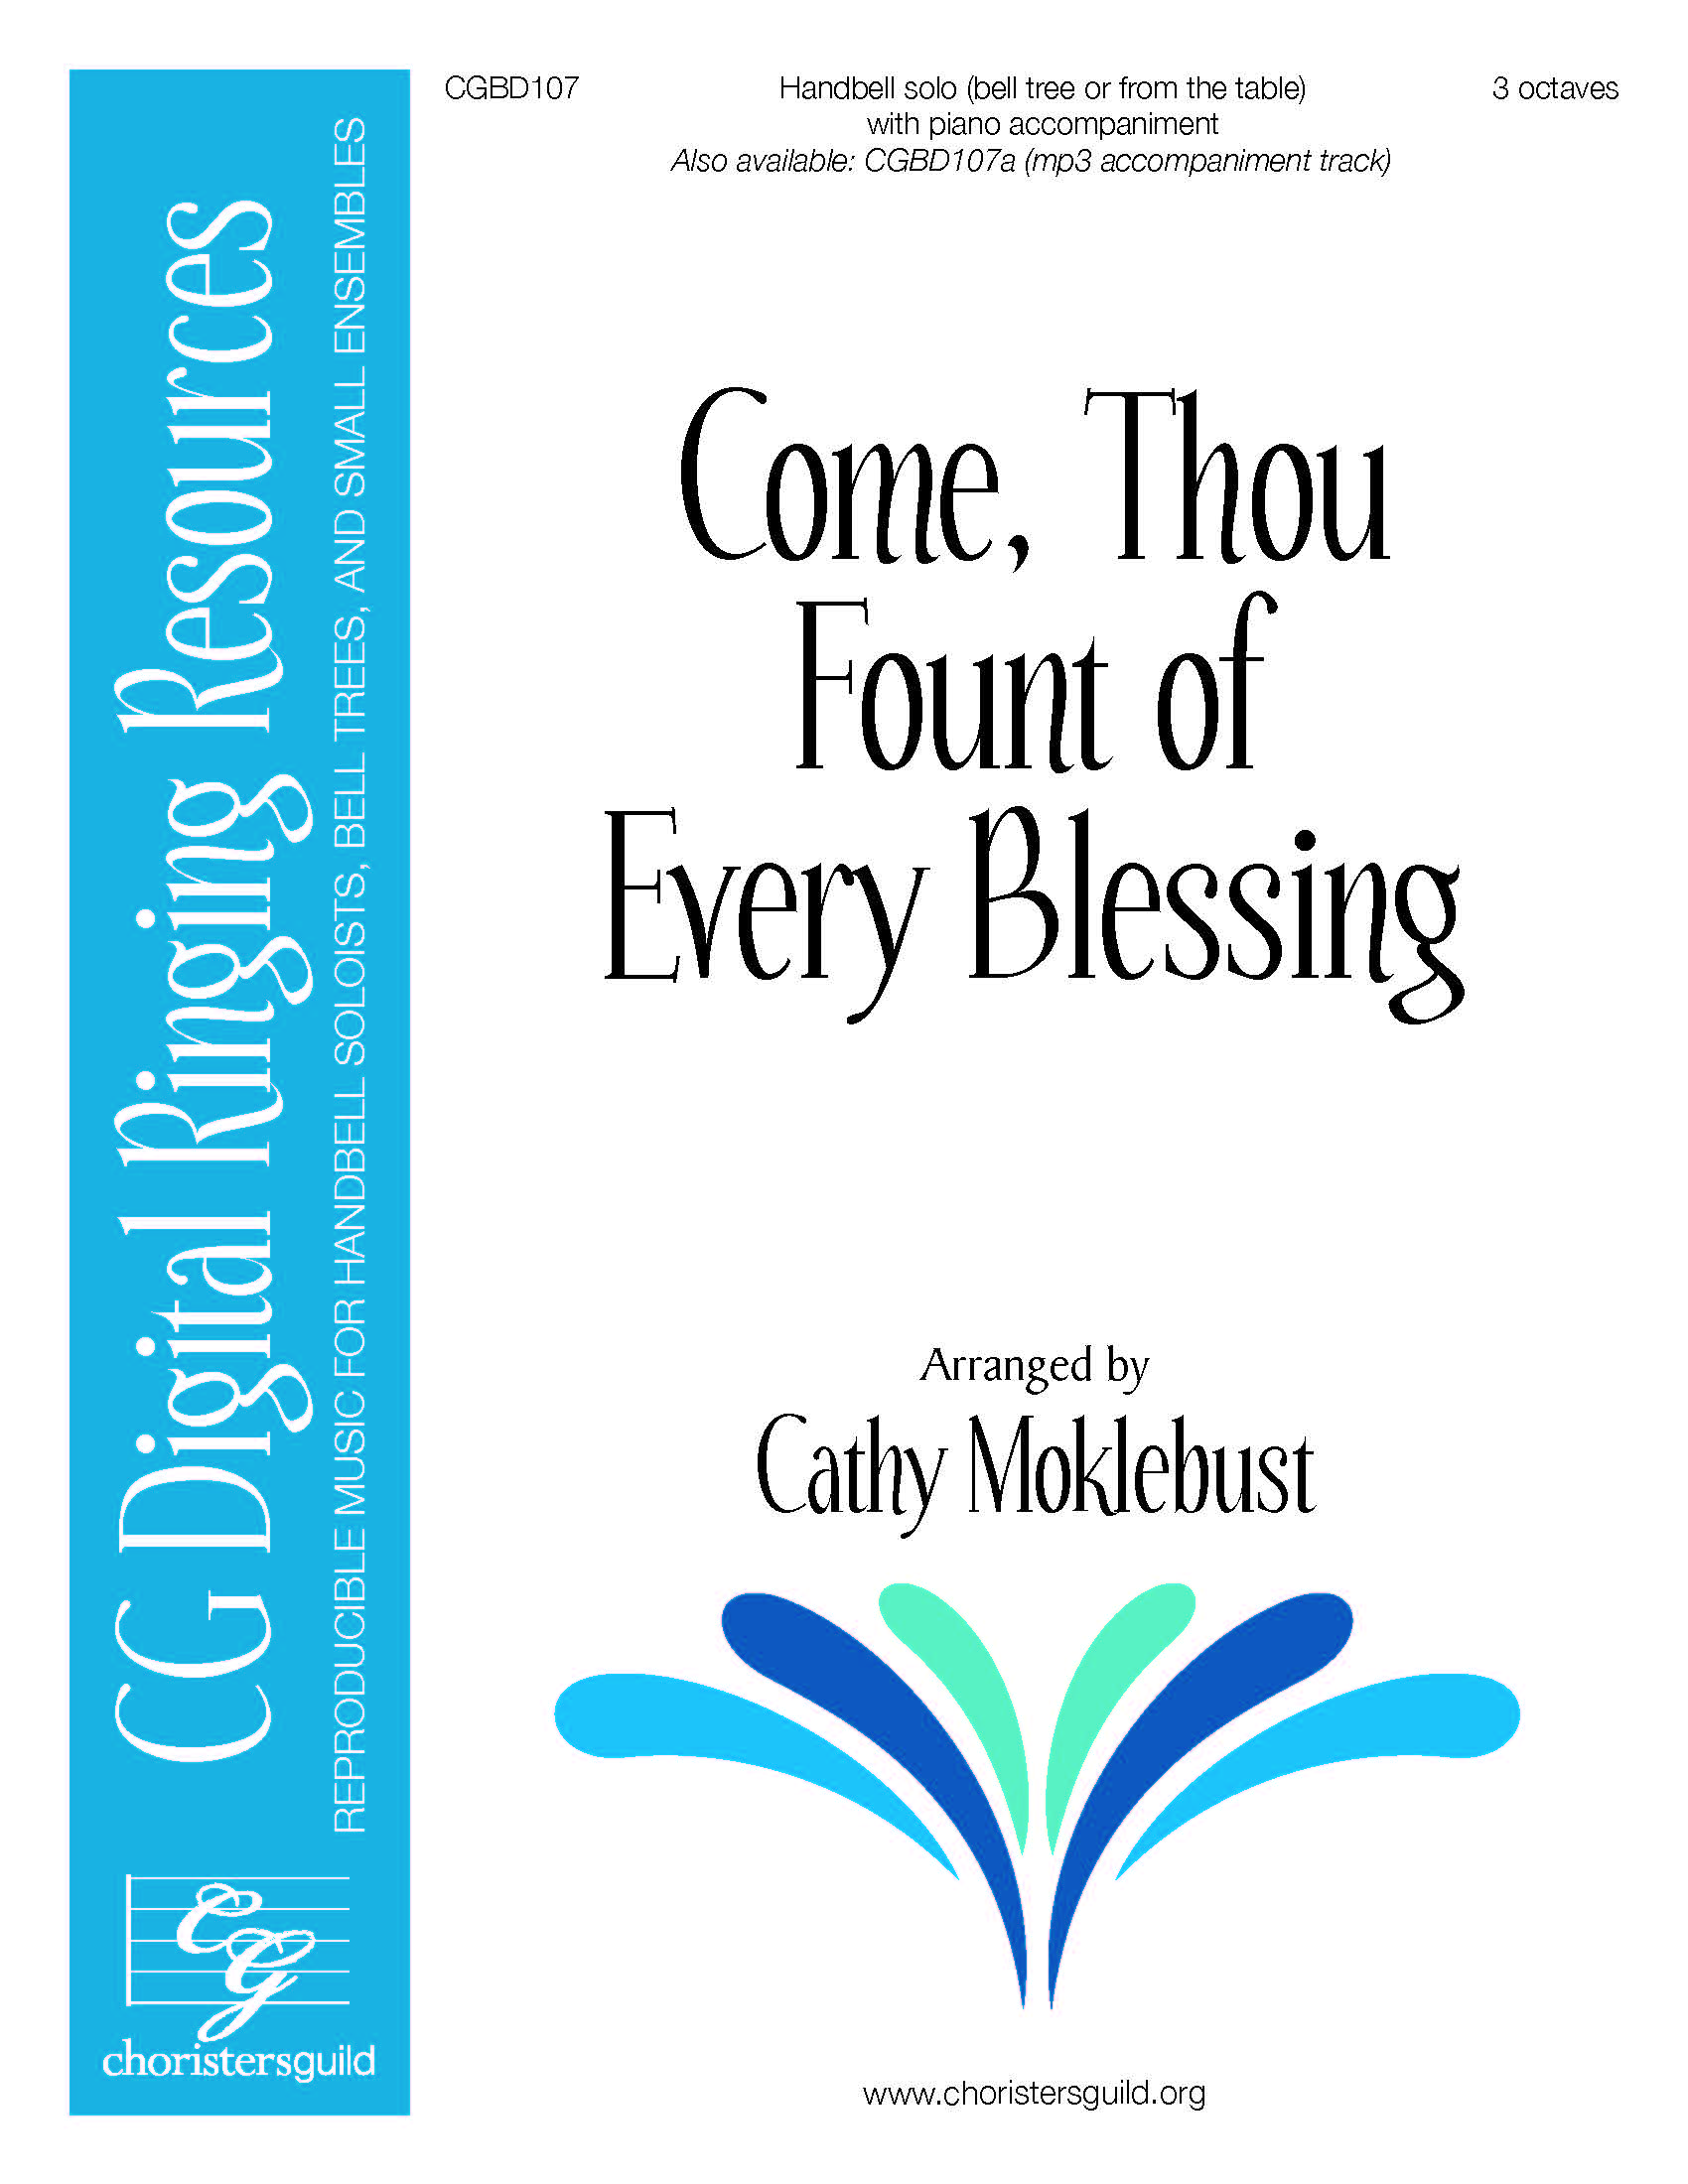 Come, Thou Fount of Every Blessing - Digital Accompaniment Track